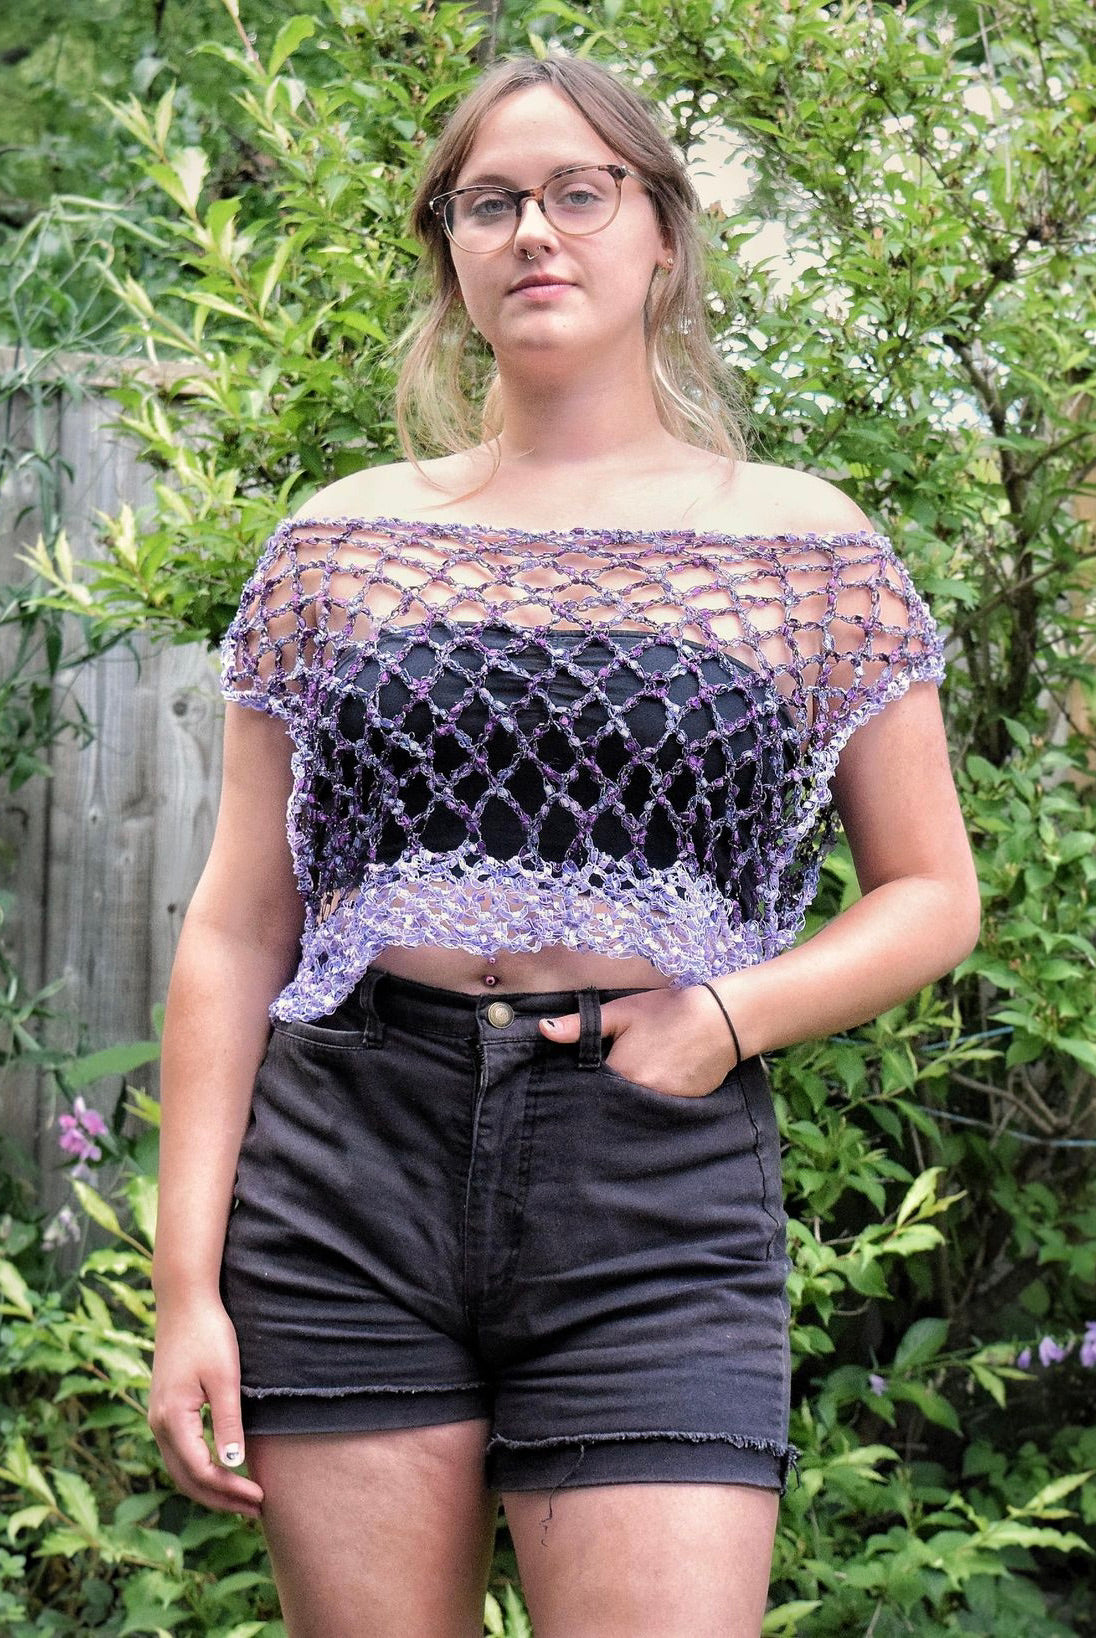 Crocheted CROP Tank Top, Purple & Lilac Cover Up – Claudia's Crochet  Creation